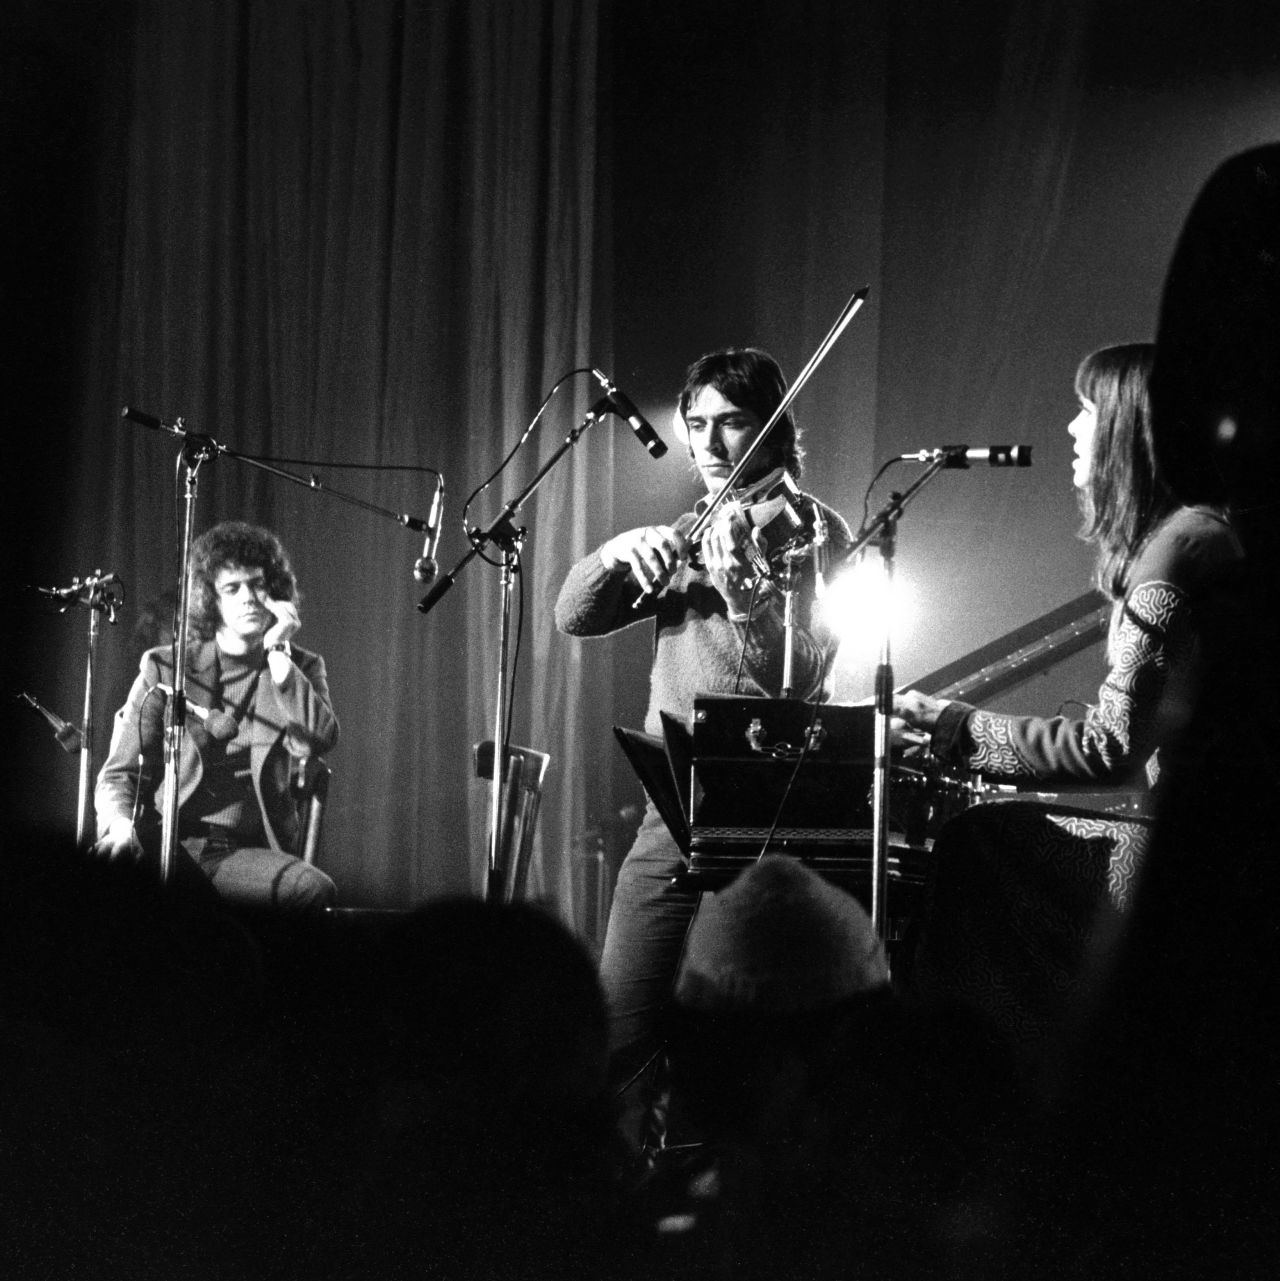 Reed, violist John Cale and German singer Nico perform in France in 1972. Reed, Cale, guitarist Sterling Morrison, and drummer Maureen Tucker played their first show as the Velvet Underground in 1965.